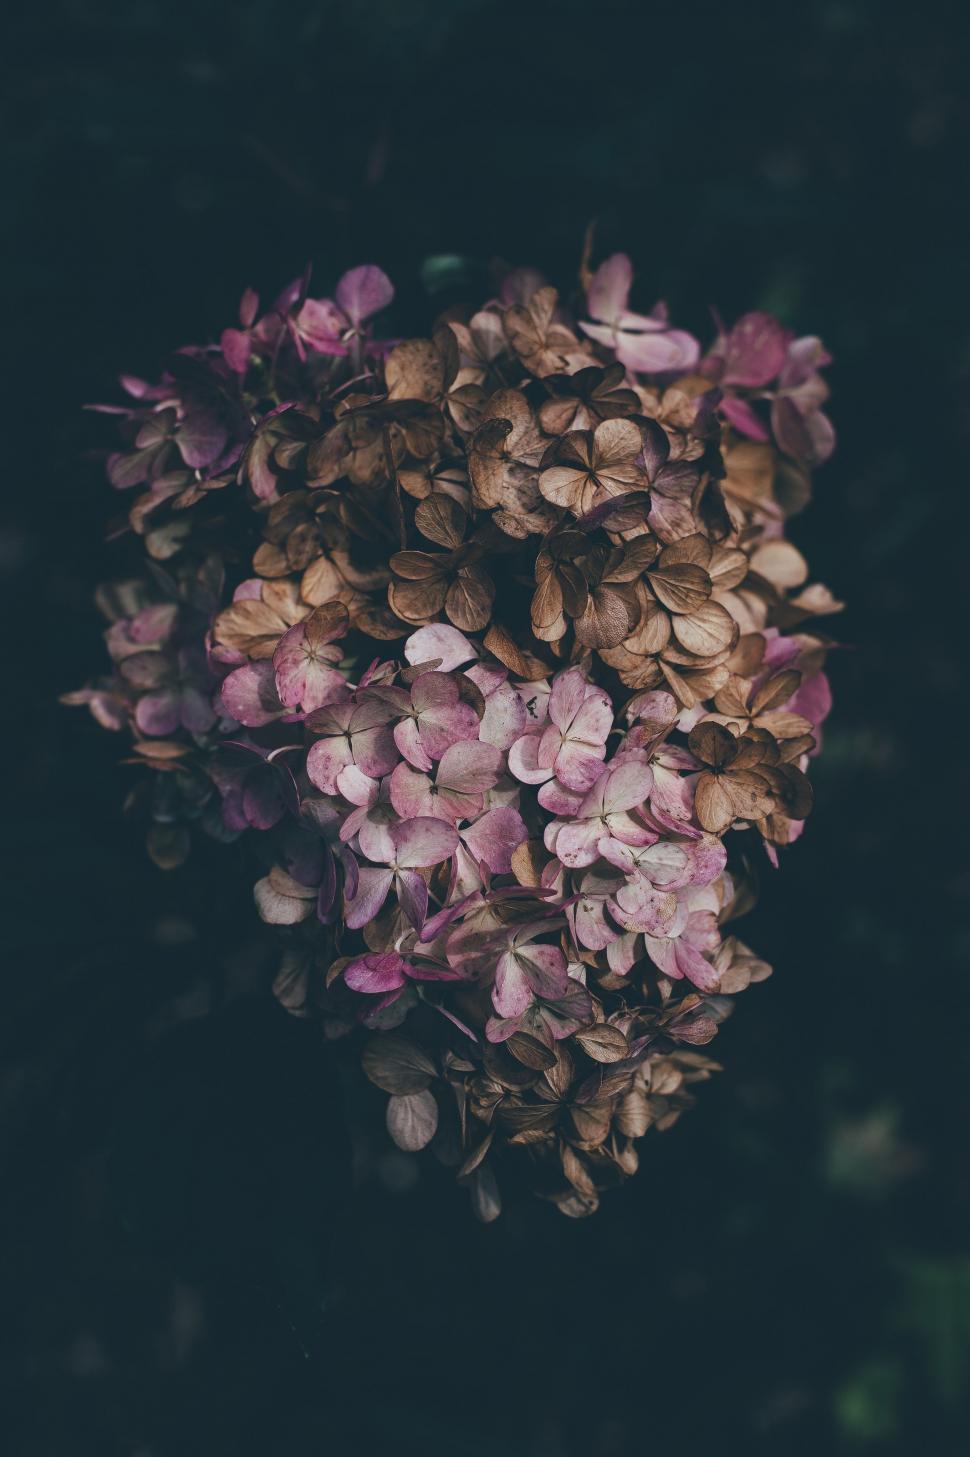 Free Image of Stale Flowers  